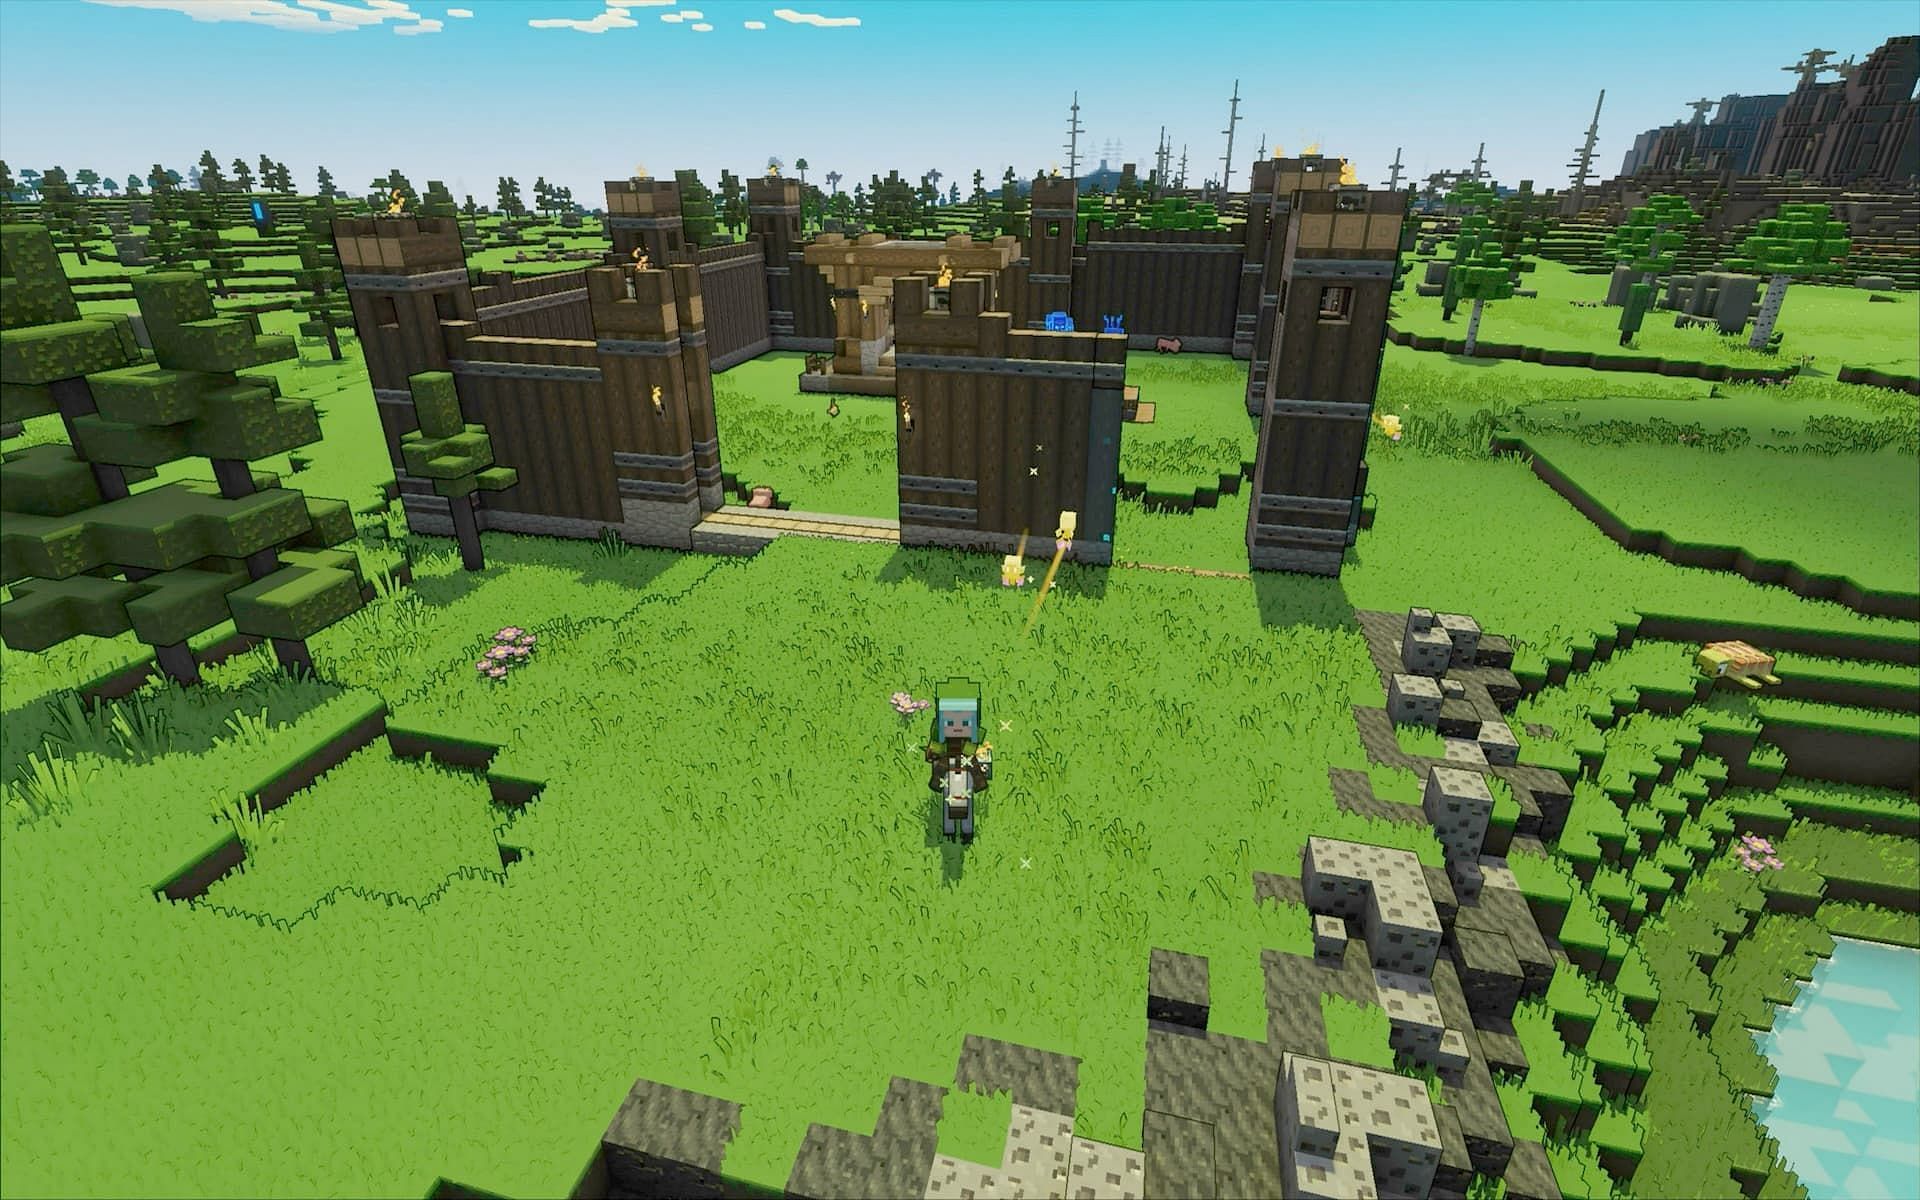 Players can command their armies in Minecraft Legends (Image via Mojang)